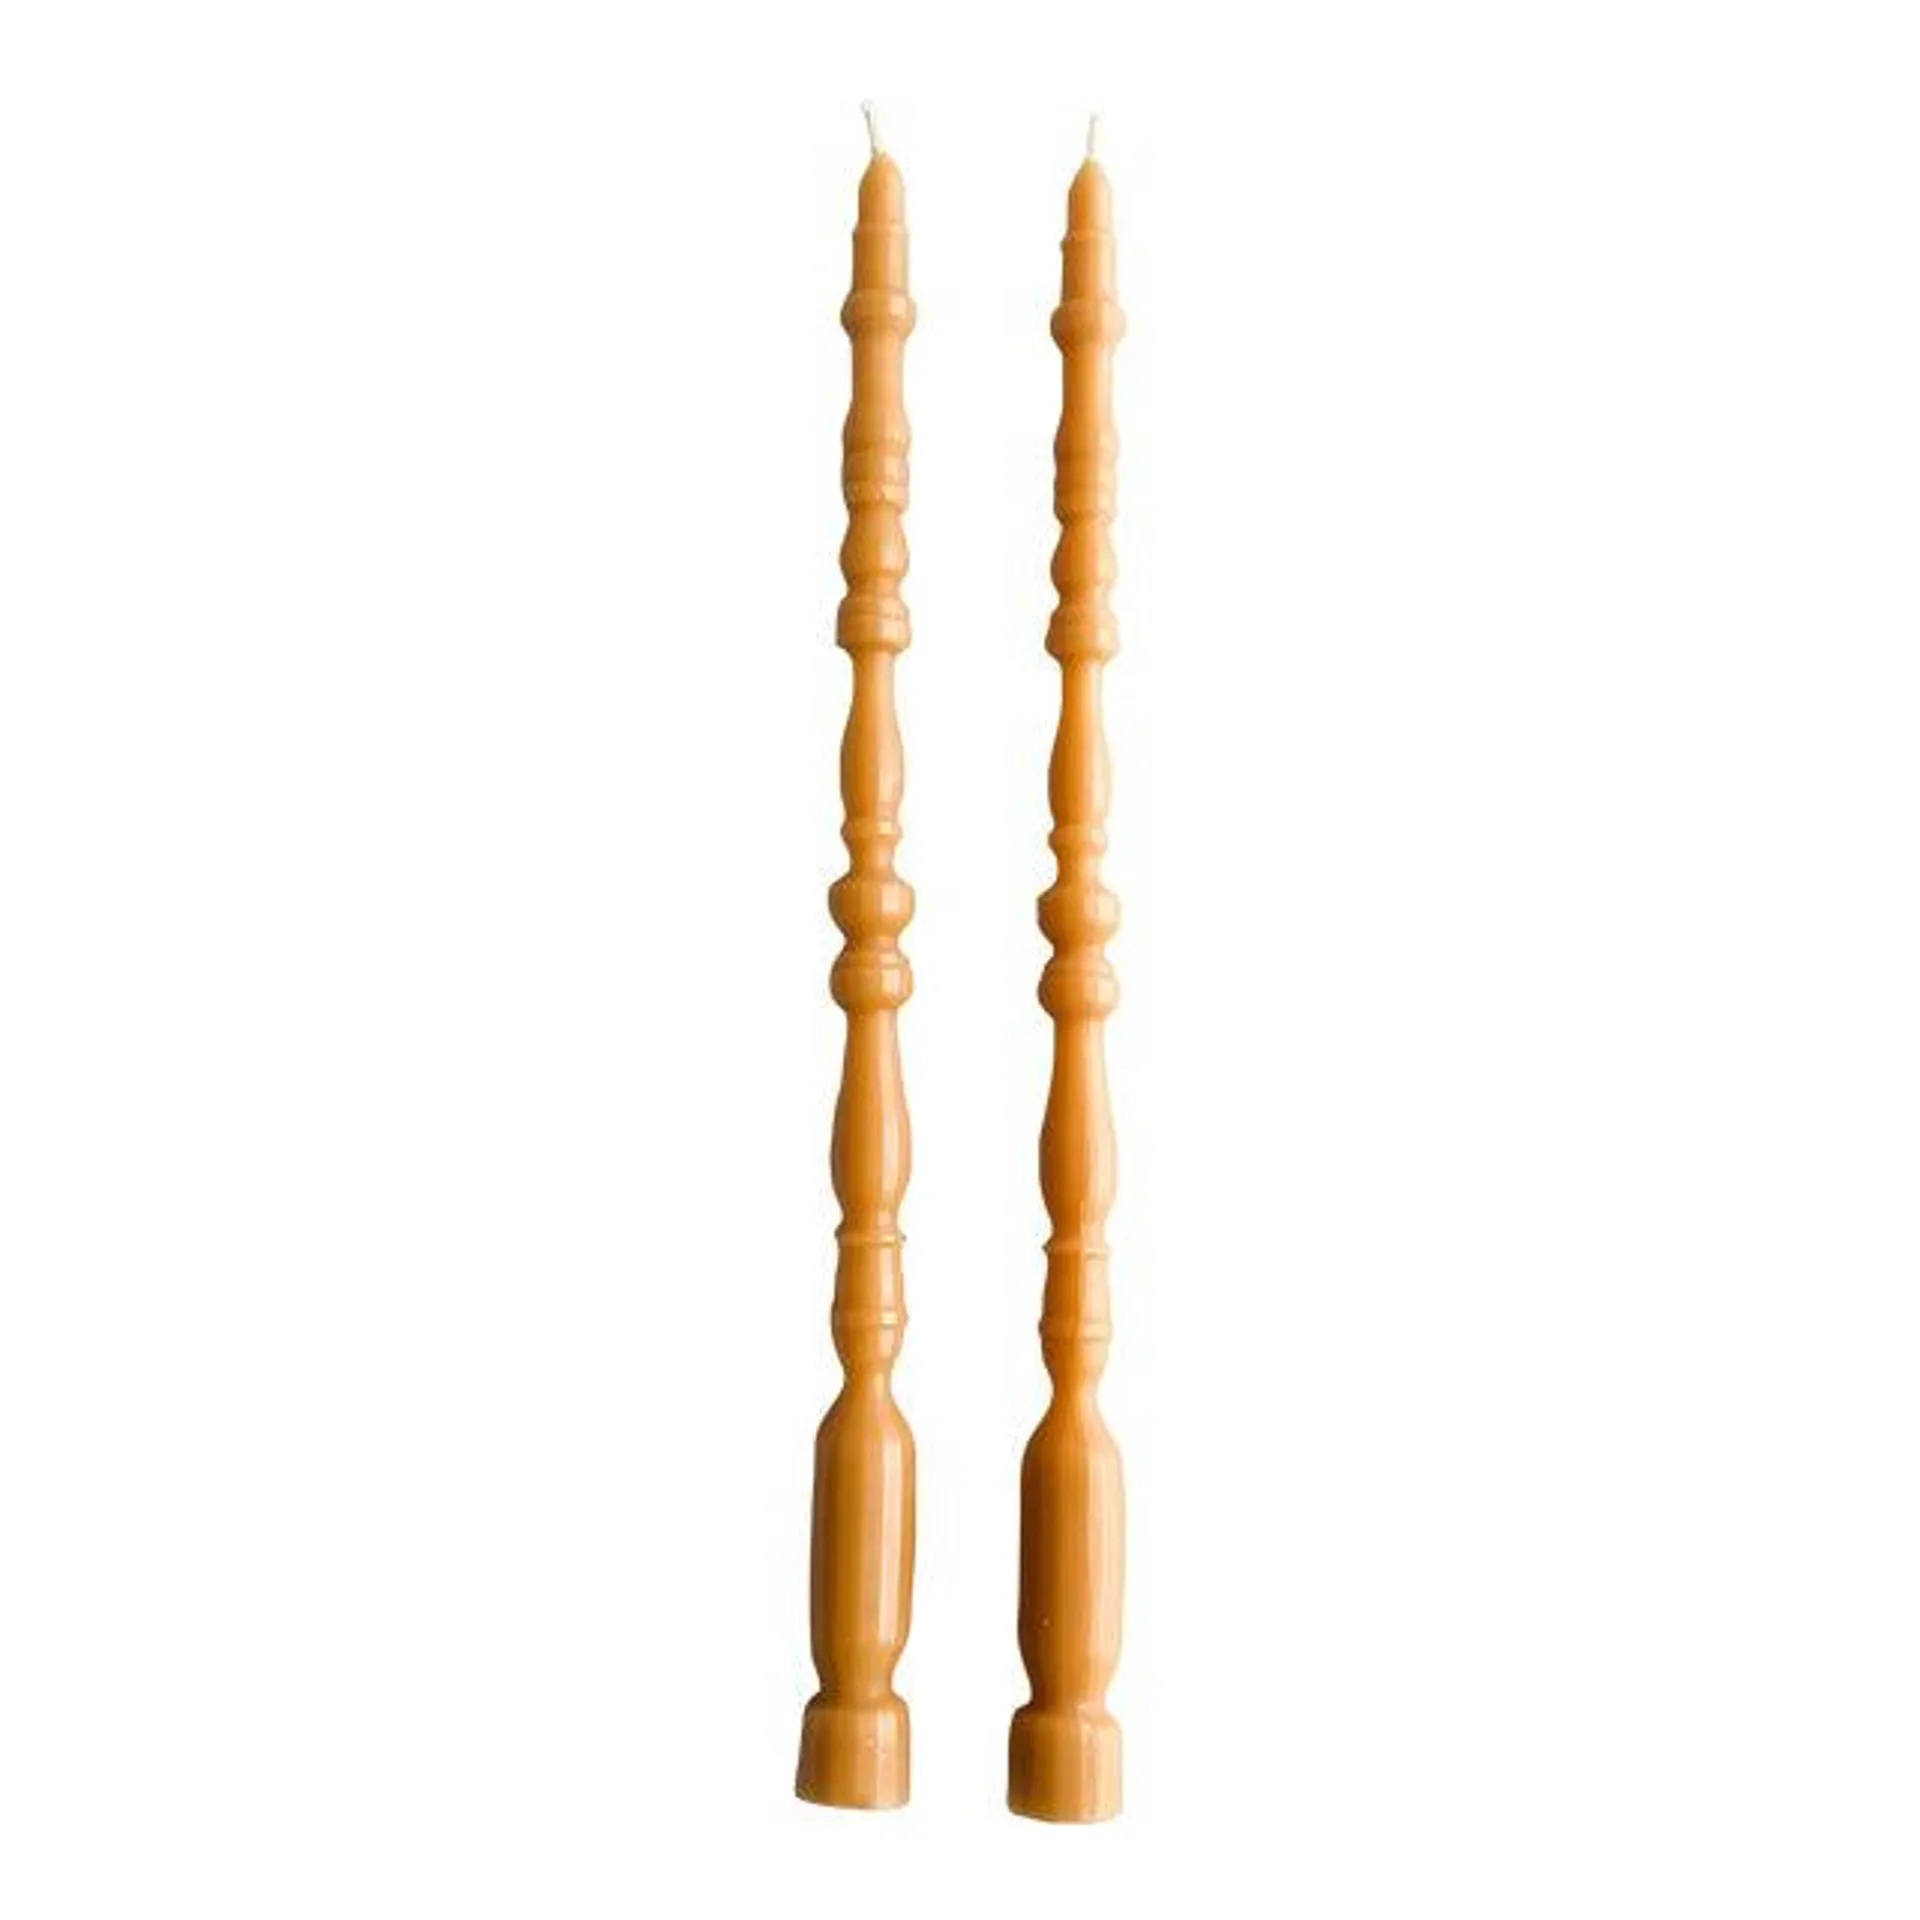 Spindle Leg Tapers Beeswax Candles in Oro Goldenrod - a Pair